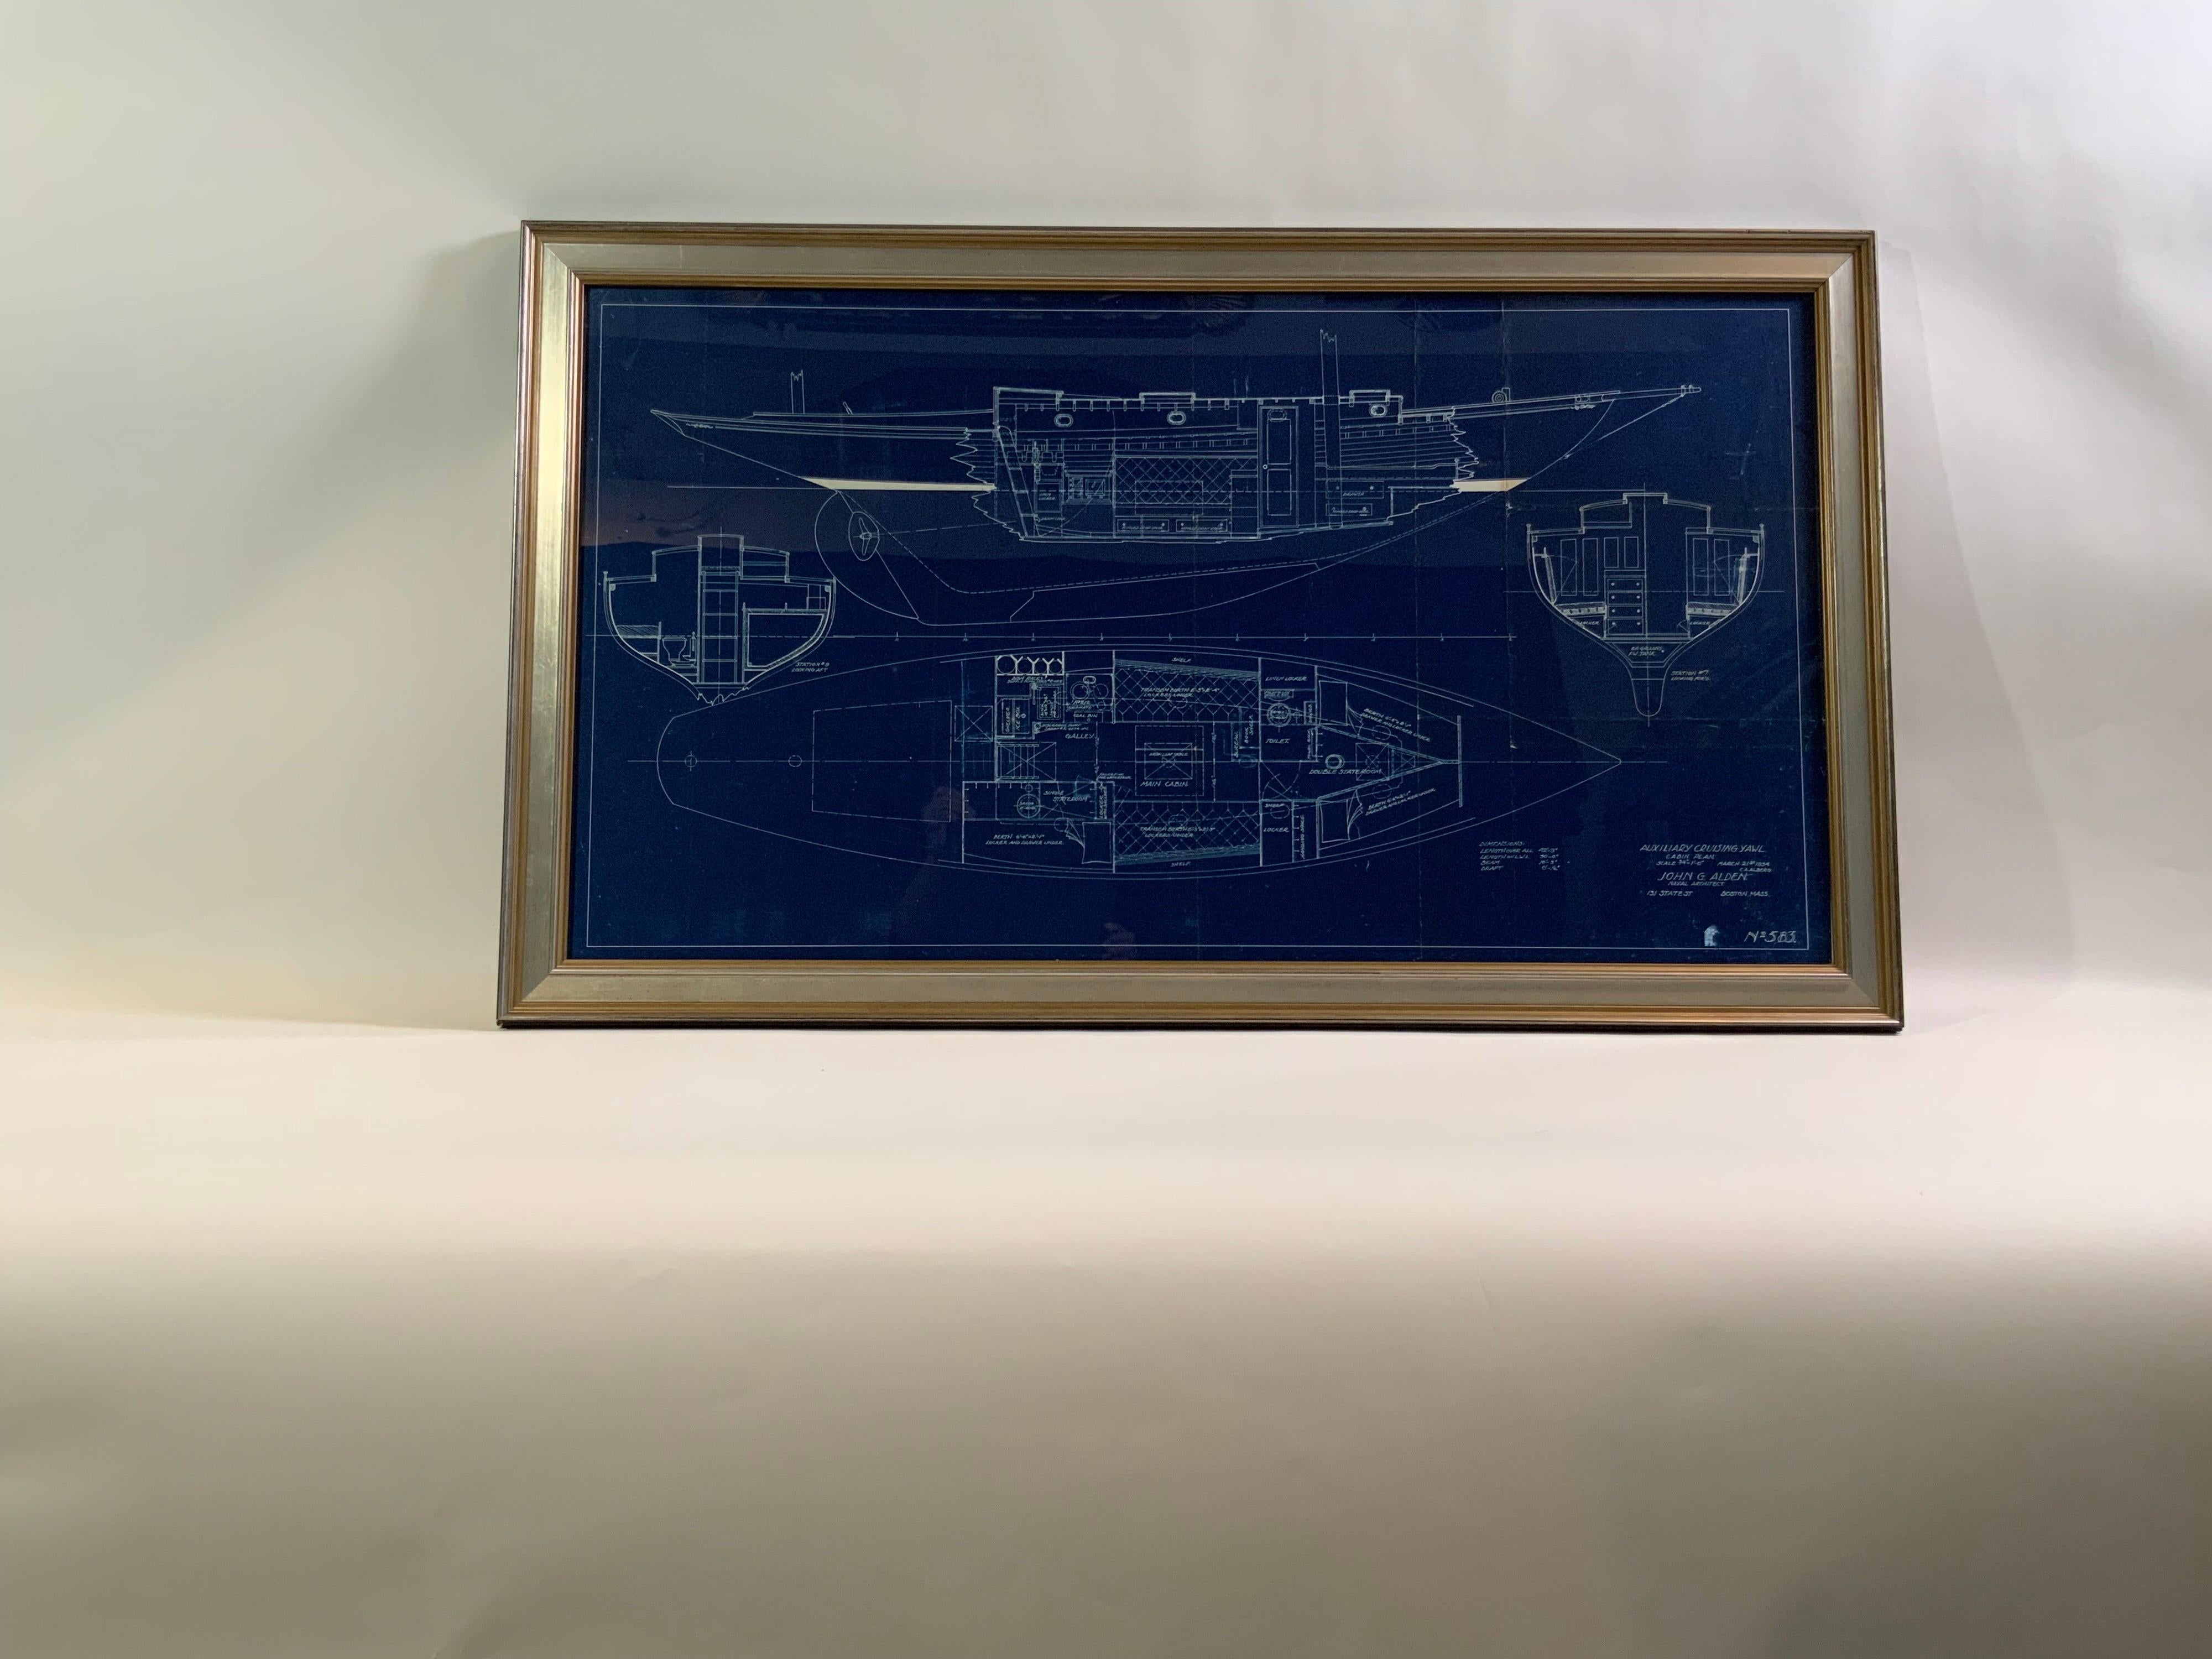 Exceptional and stunning original yacht blueprint from John G Alden of Boston. The legend panel reads “Auxiliary Cruising Yawl” cabin plan. March 21, 1934. C.A. Alberg John G. Alden Naval Architect. 131 State St, Boston. Numbered 583. 

The crisp